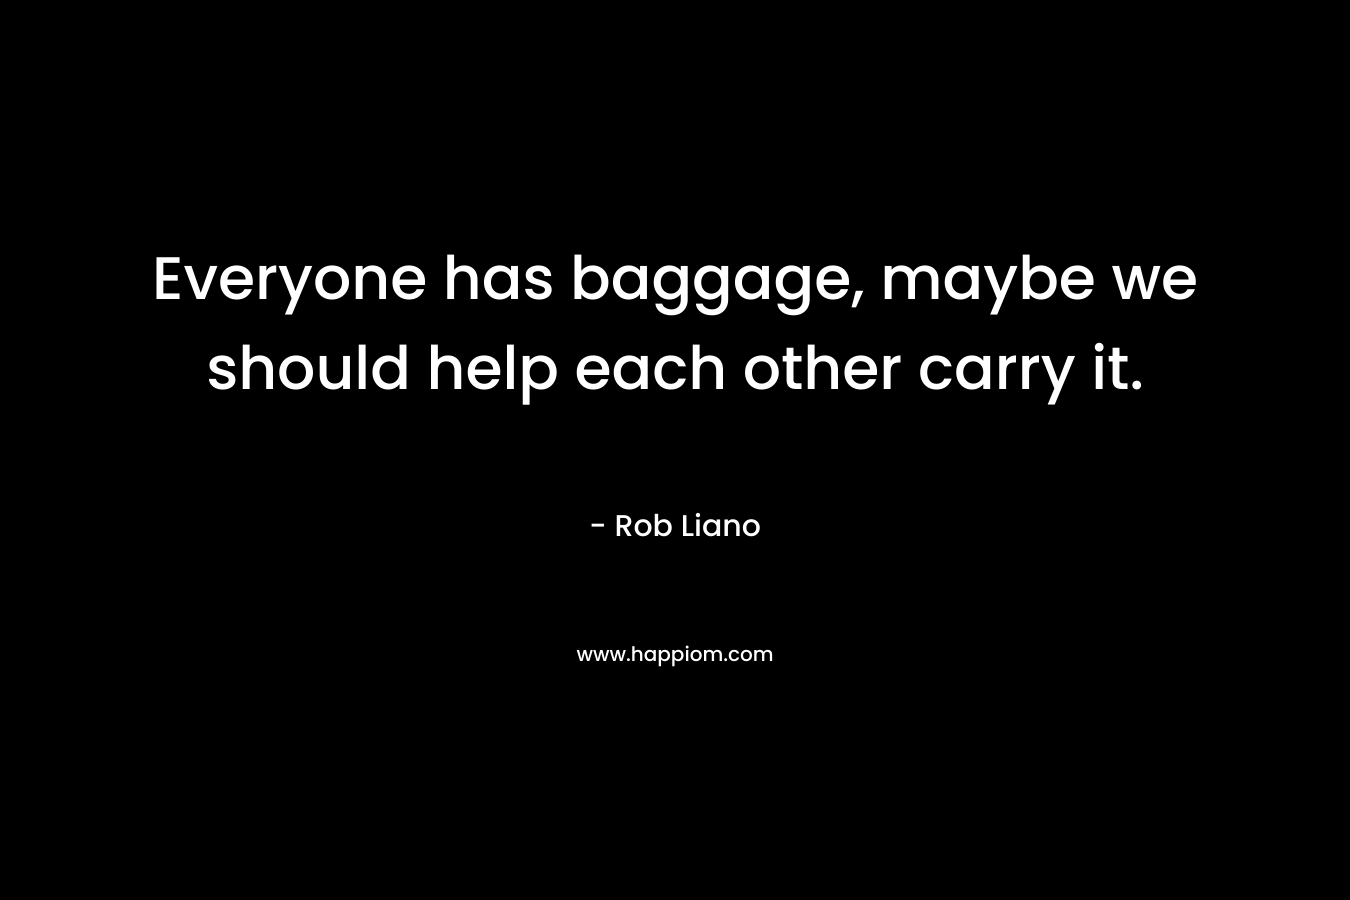 Everyone has baggage, maybe we should help each other carry it.